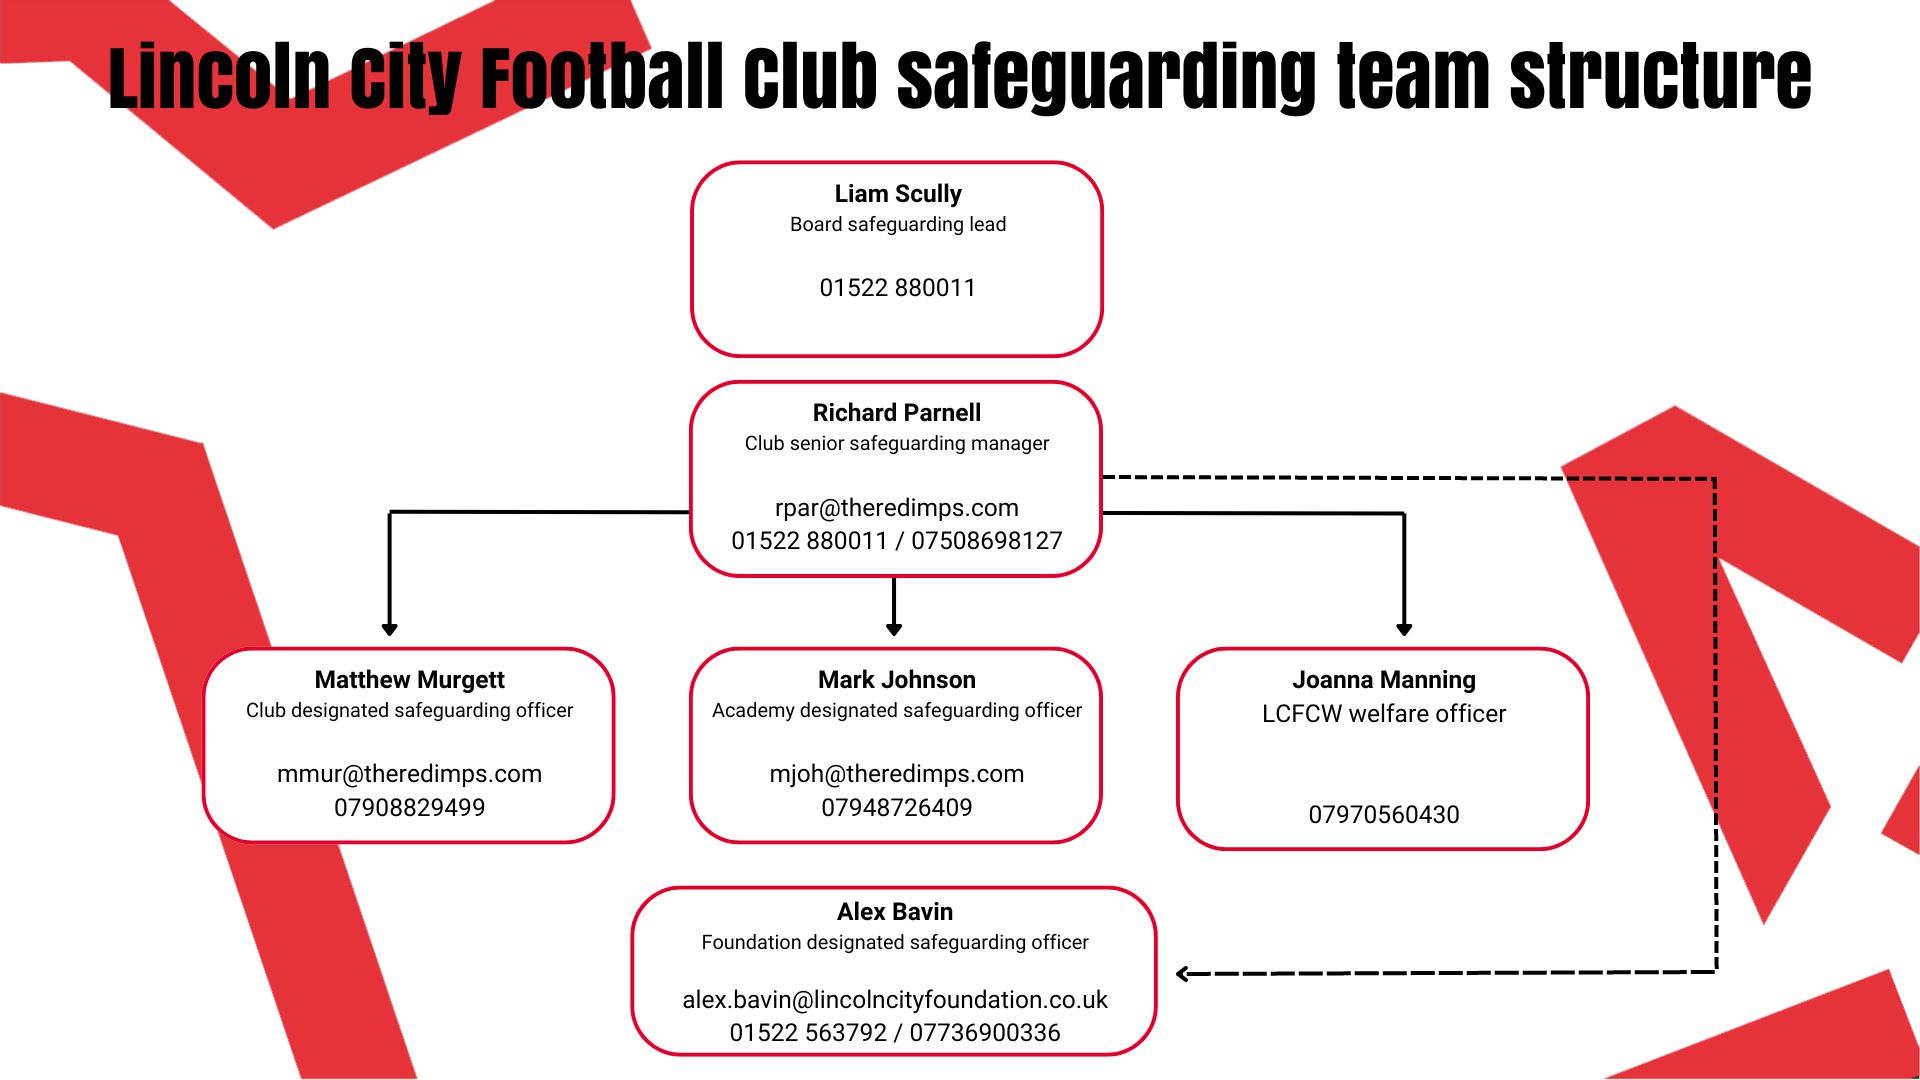 A graphic displaying the safeguarding team structure at Lincoln City